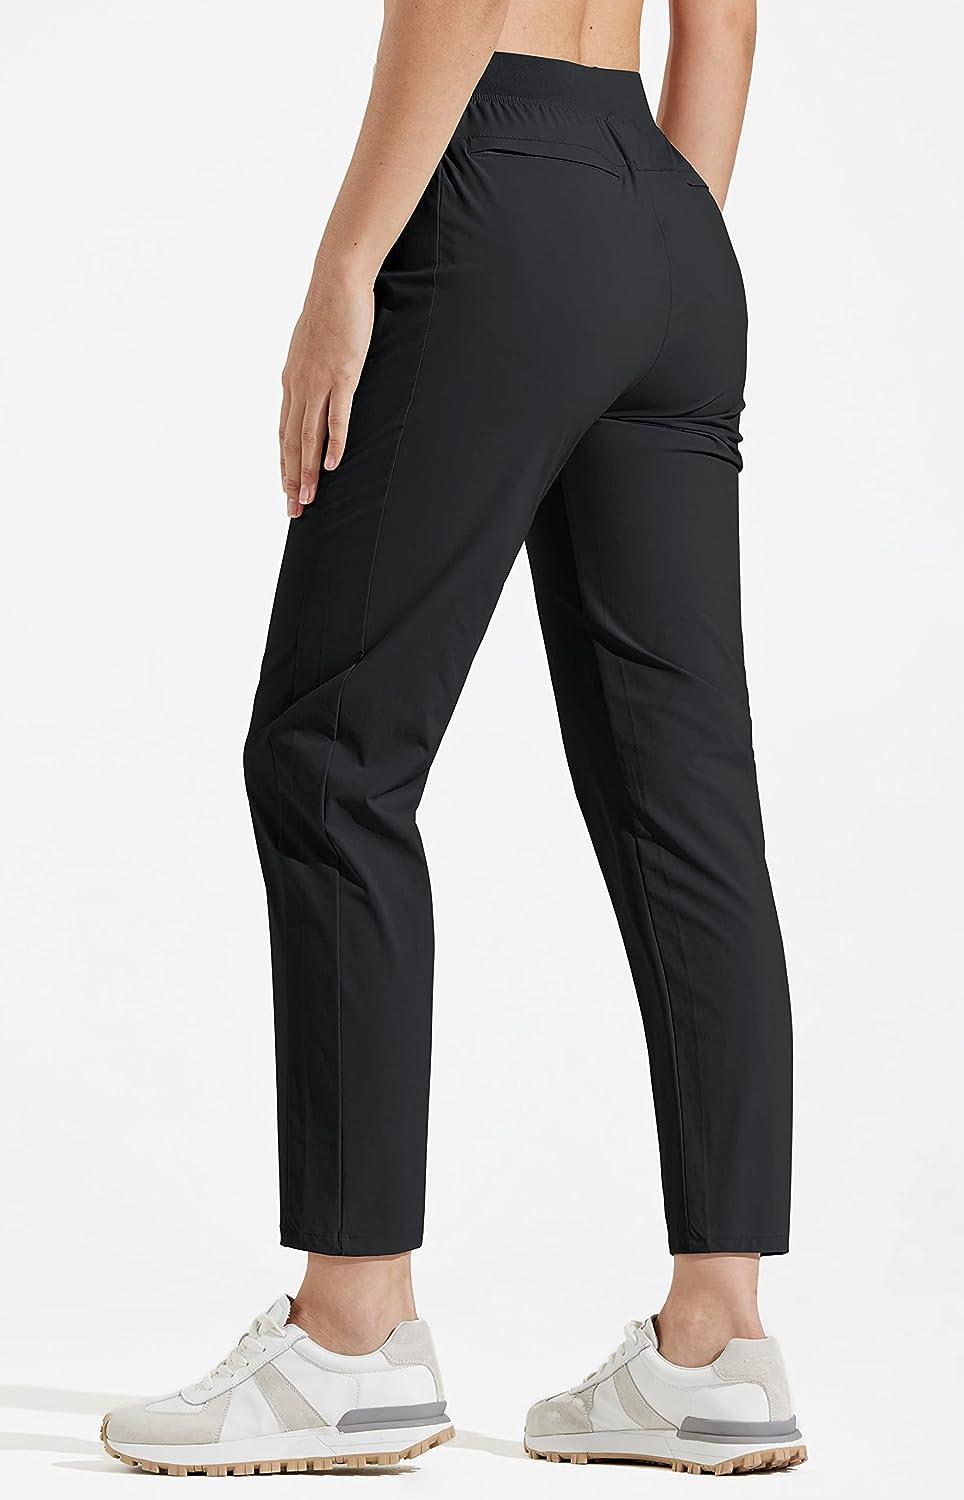 High Quality Slim Fit Mens Office Pants Men For Casual And Streetwear,  Perfect For Office And Formal Occasions Ankle Length, All Match Design Size  34 201128 From Cong03, $26.22 | DHgate.Com